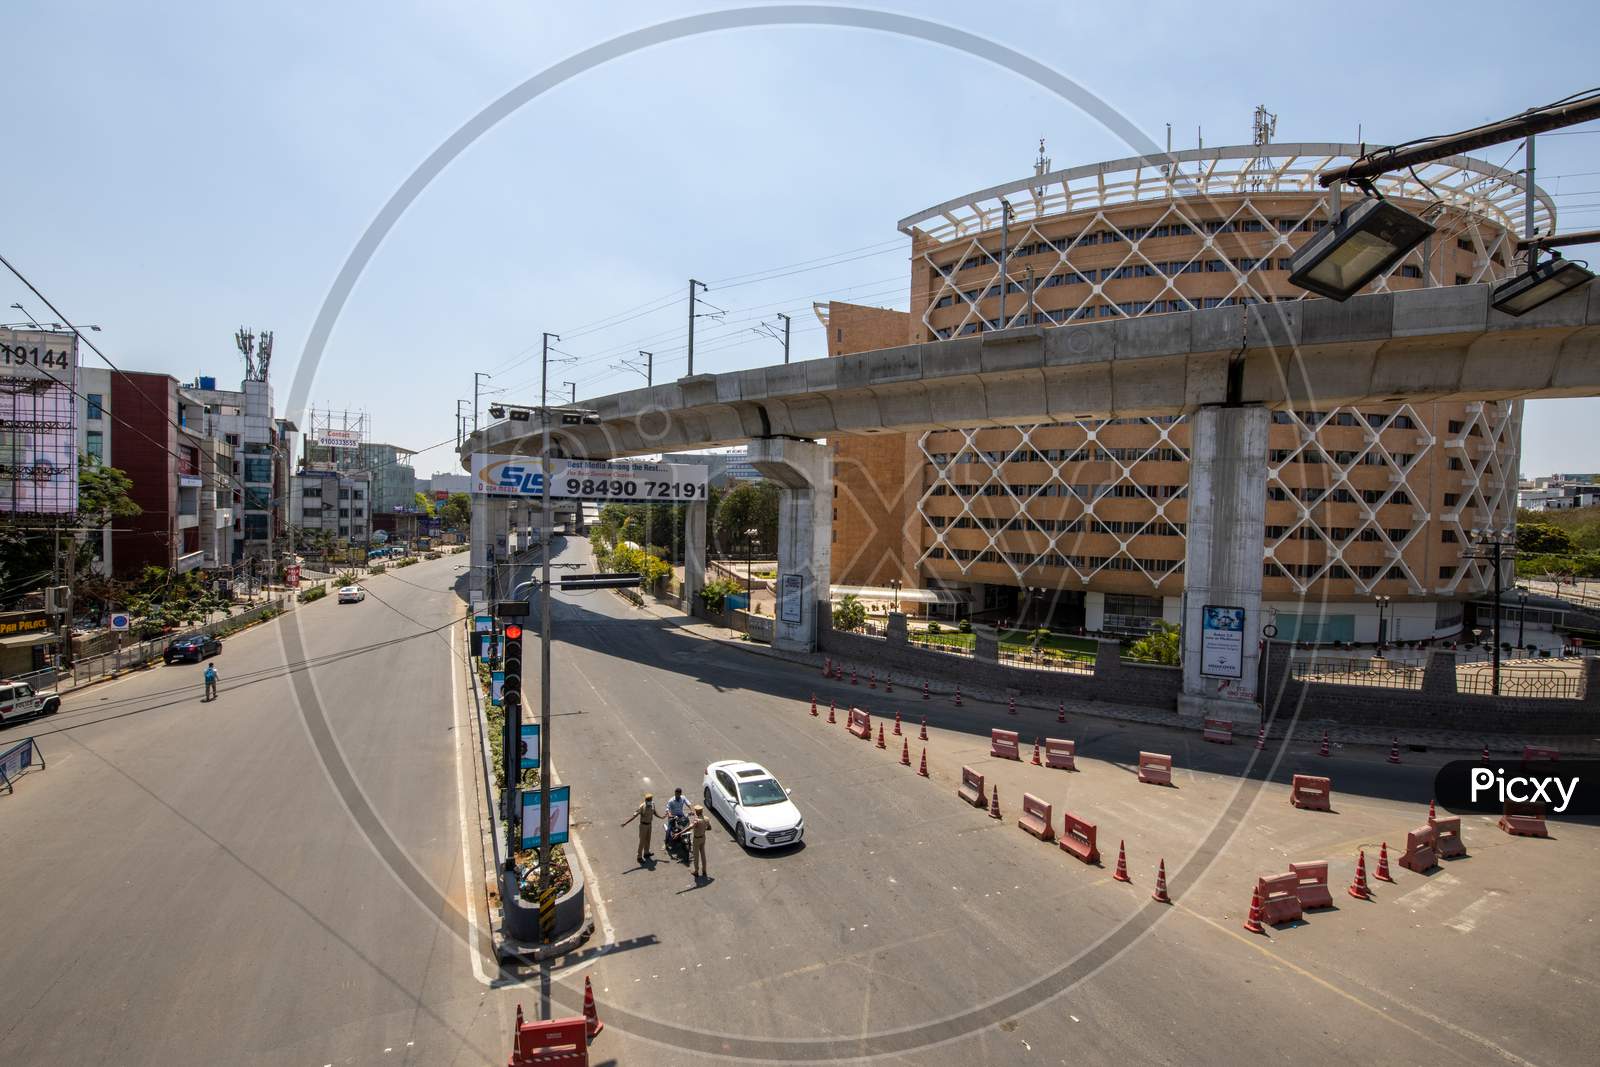 Janata Curfew , Deserted Roads At Busy Hi-tech City Signal  in Hyderabad  As Indian Prime Minister Narendra Modi Called For a 14 Hour Janta  Curfew Or Self-imposed  Quarantine To Break The  Highly Contagious  COVID 19 Or Corona Virus Spread